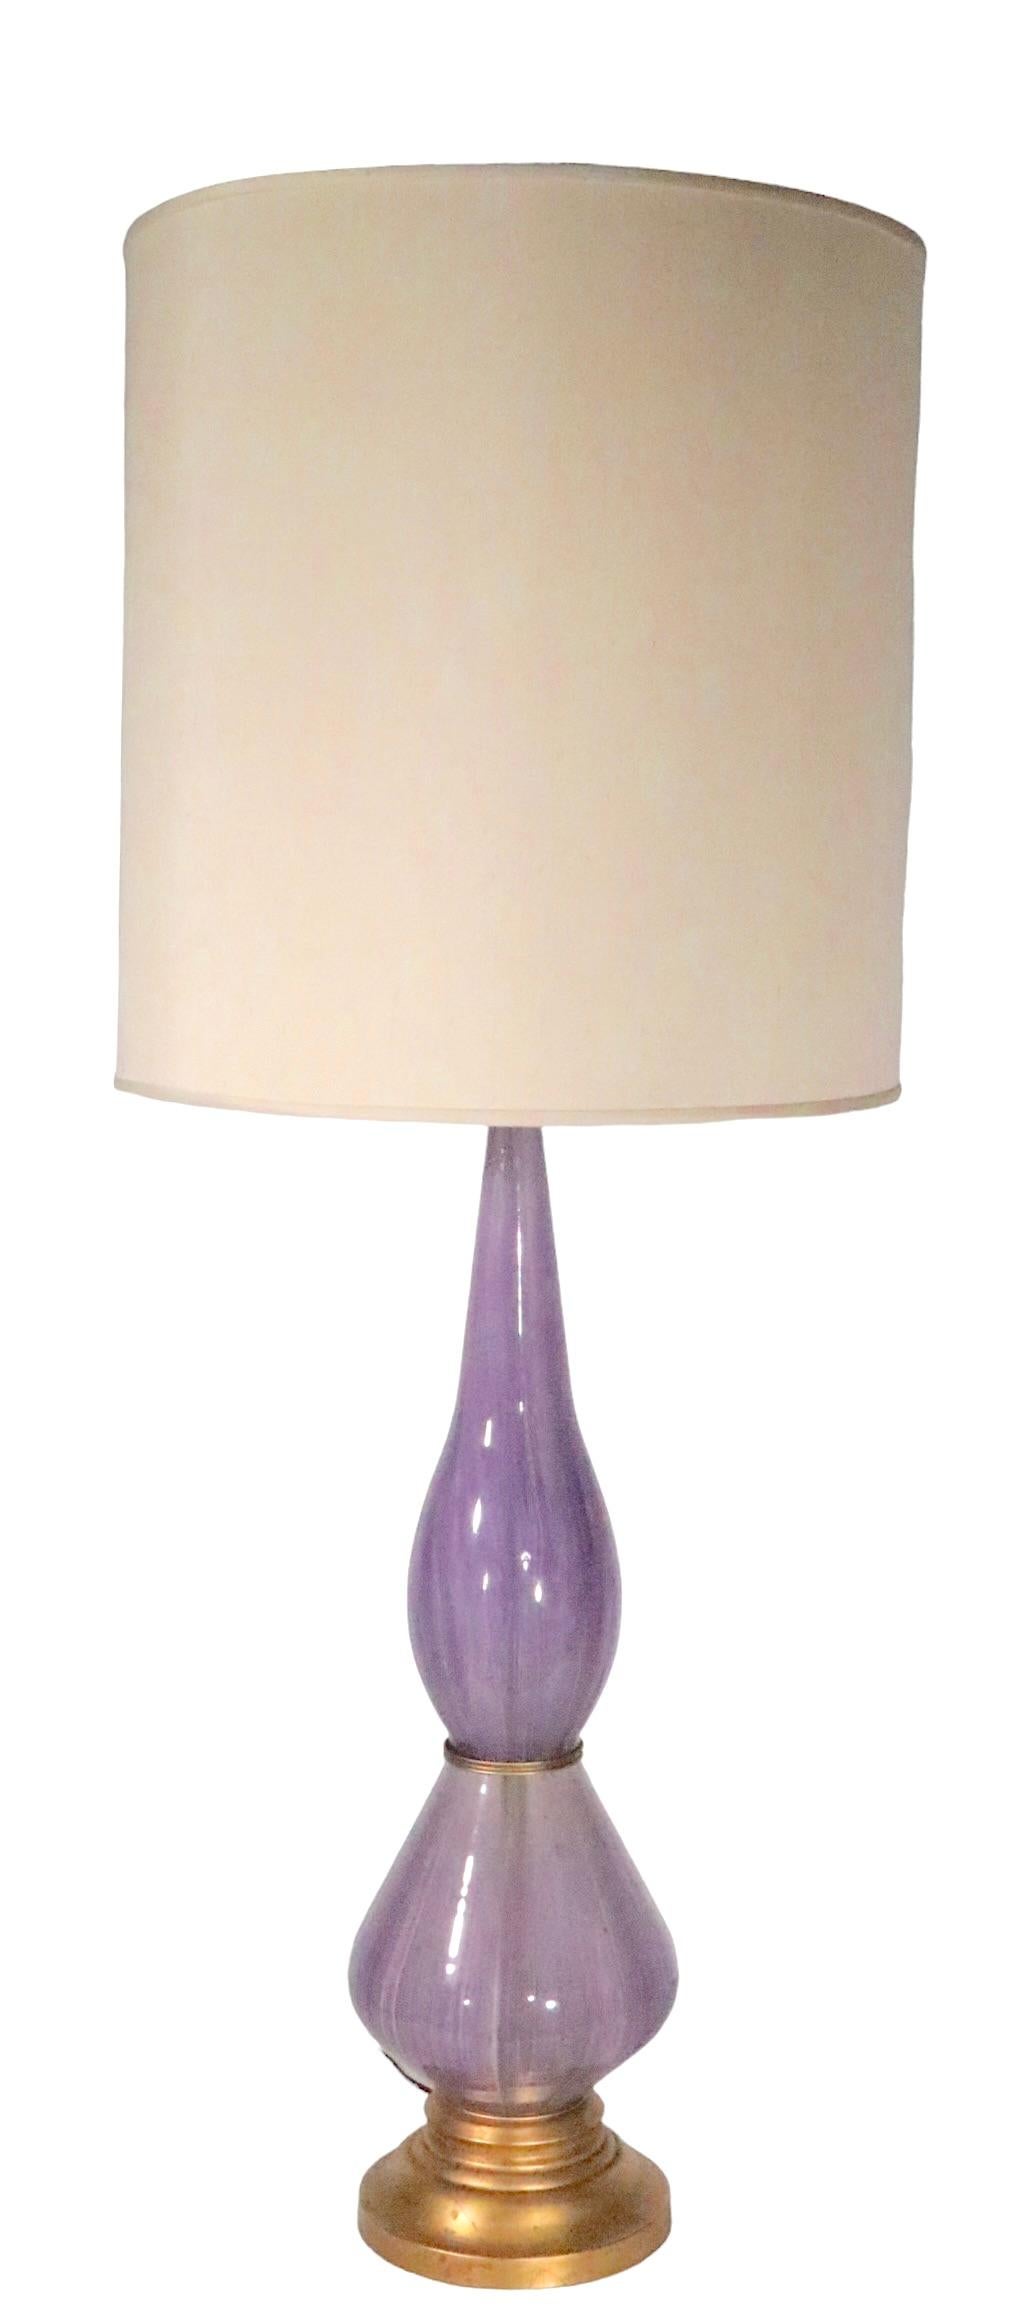 Large Murano Glass Table Lamp in Lavender Glass, circa 1950/1960s In Good Condition For Sale In New York, NY